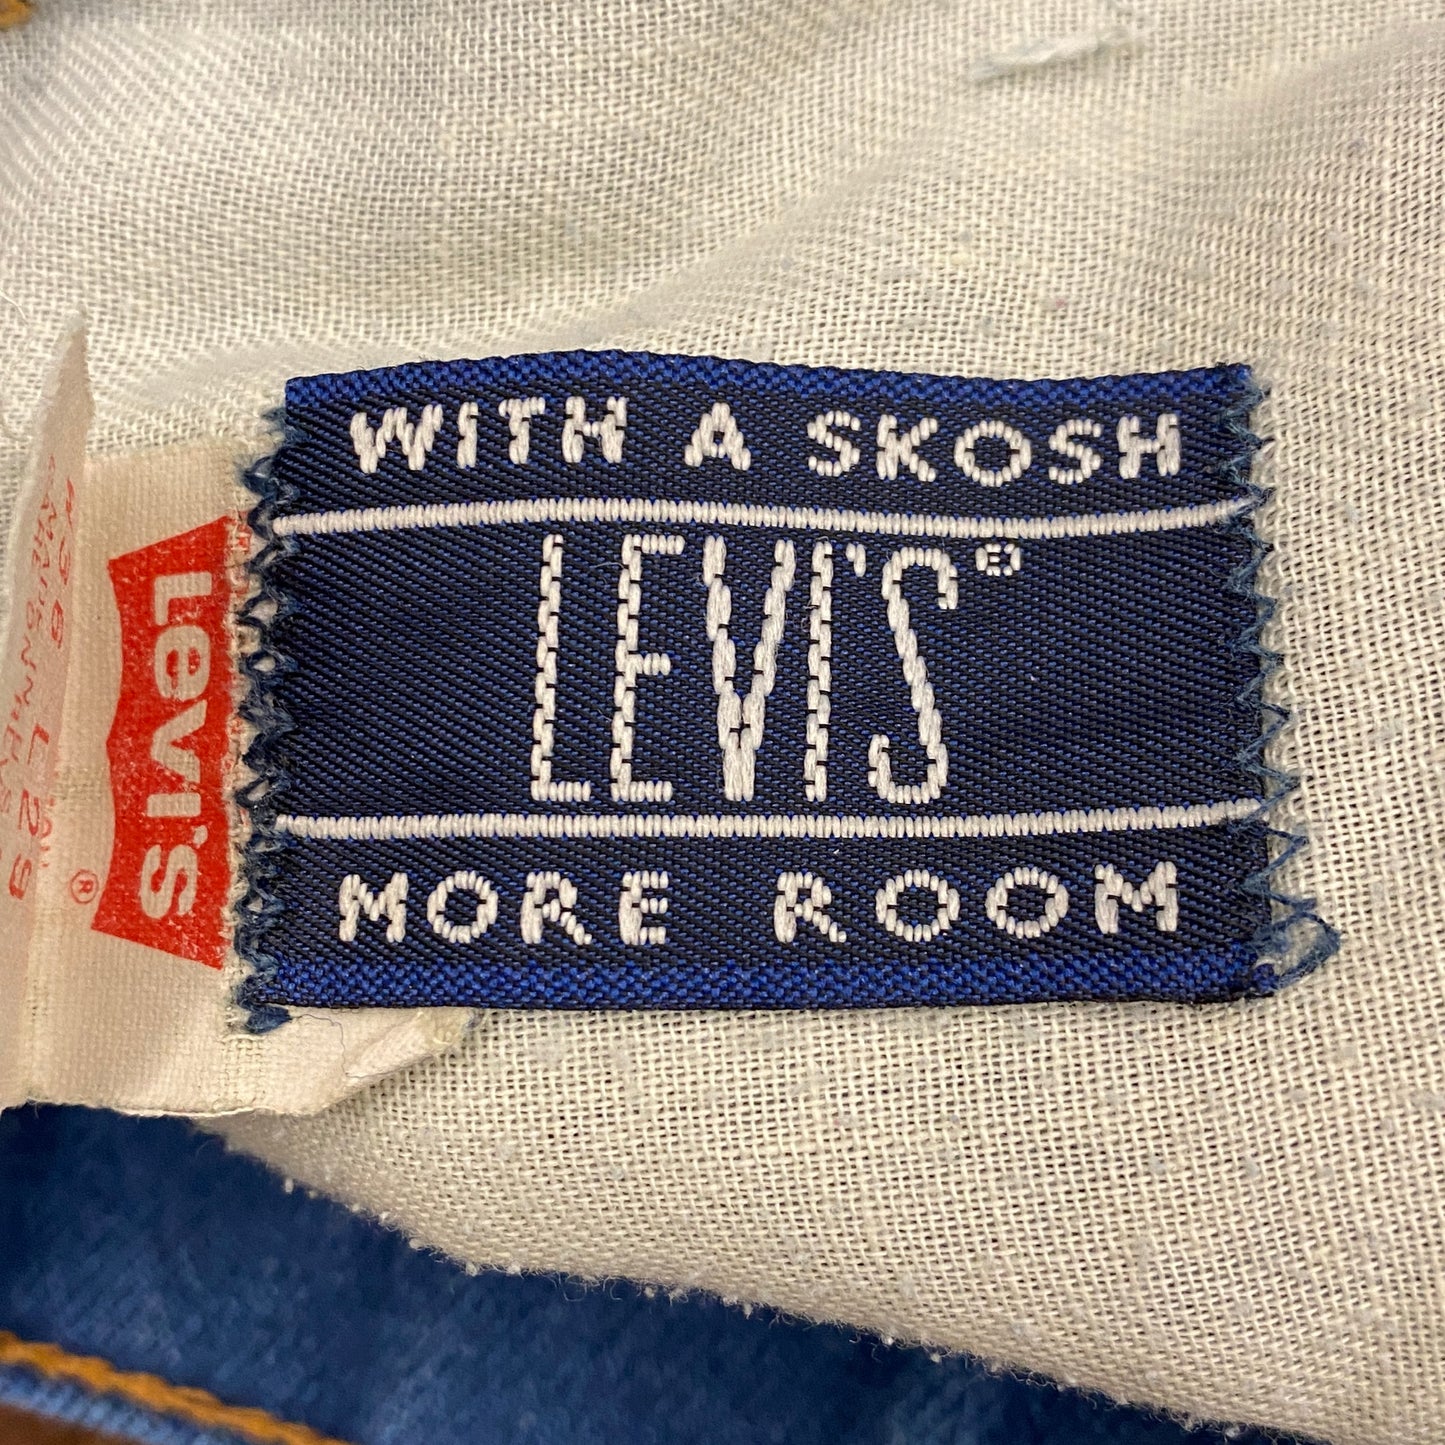 1980s Levi's Orange Tab Jeans "With a Skosh More Room" - 36"x25"